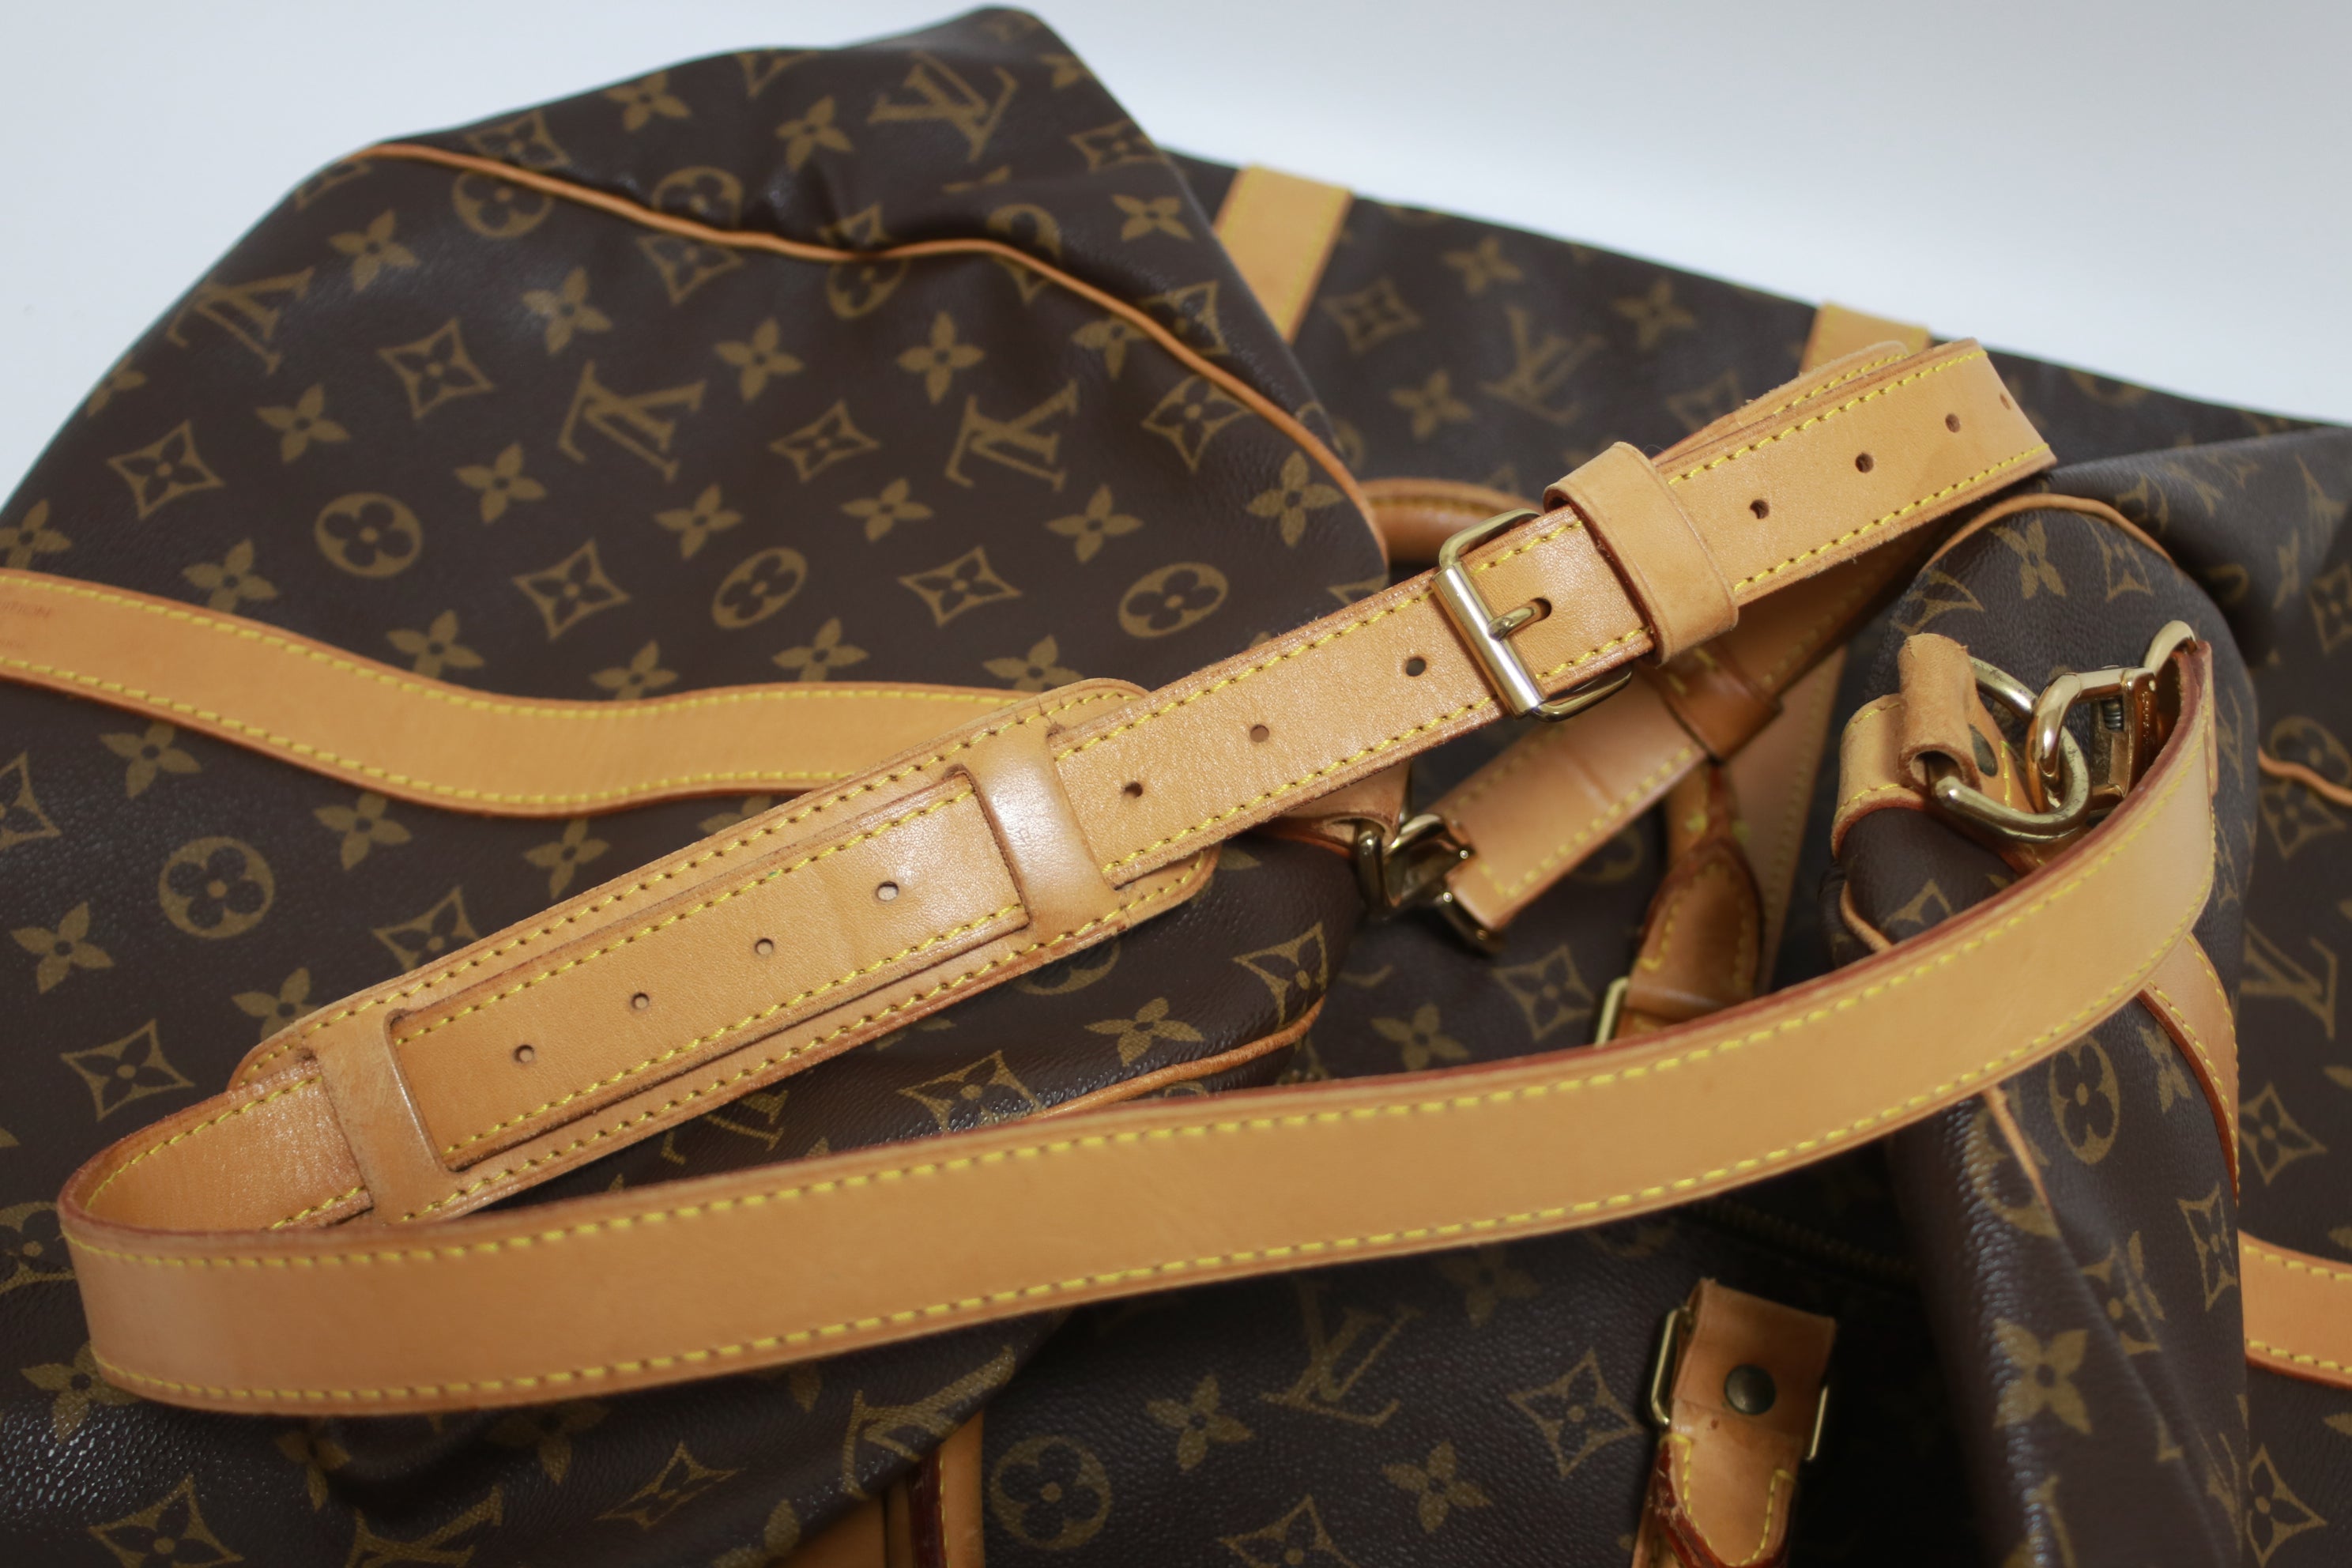 Louis Vuitton Keepall 55 Bandouliere Used (7494)